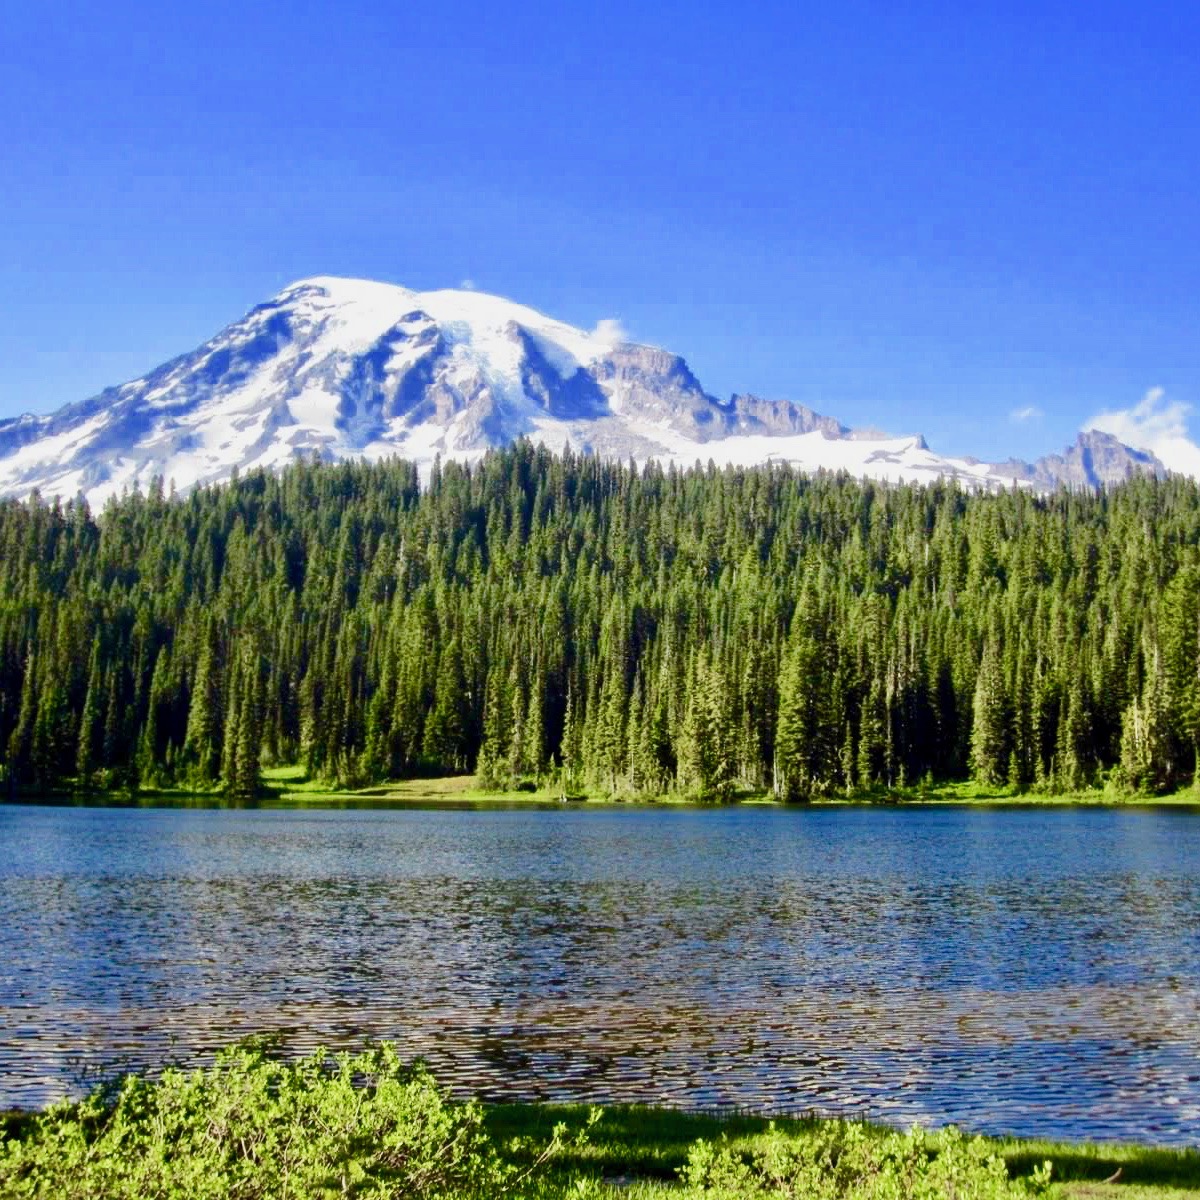 Mt. Rainier photo taken from the bank of a peaceful lake surrounded by a rich fir tree forest.  The majestic mountain rises up with an inspiring spirit in the background, the giant faces of rock covered by patches of glaciers and snow.  The sky is blue on this sunny day. 